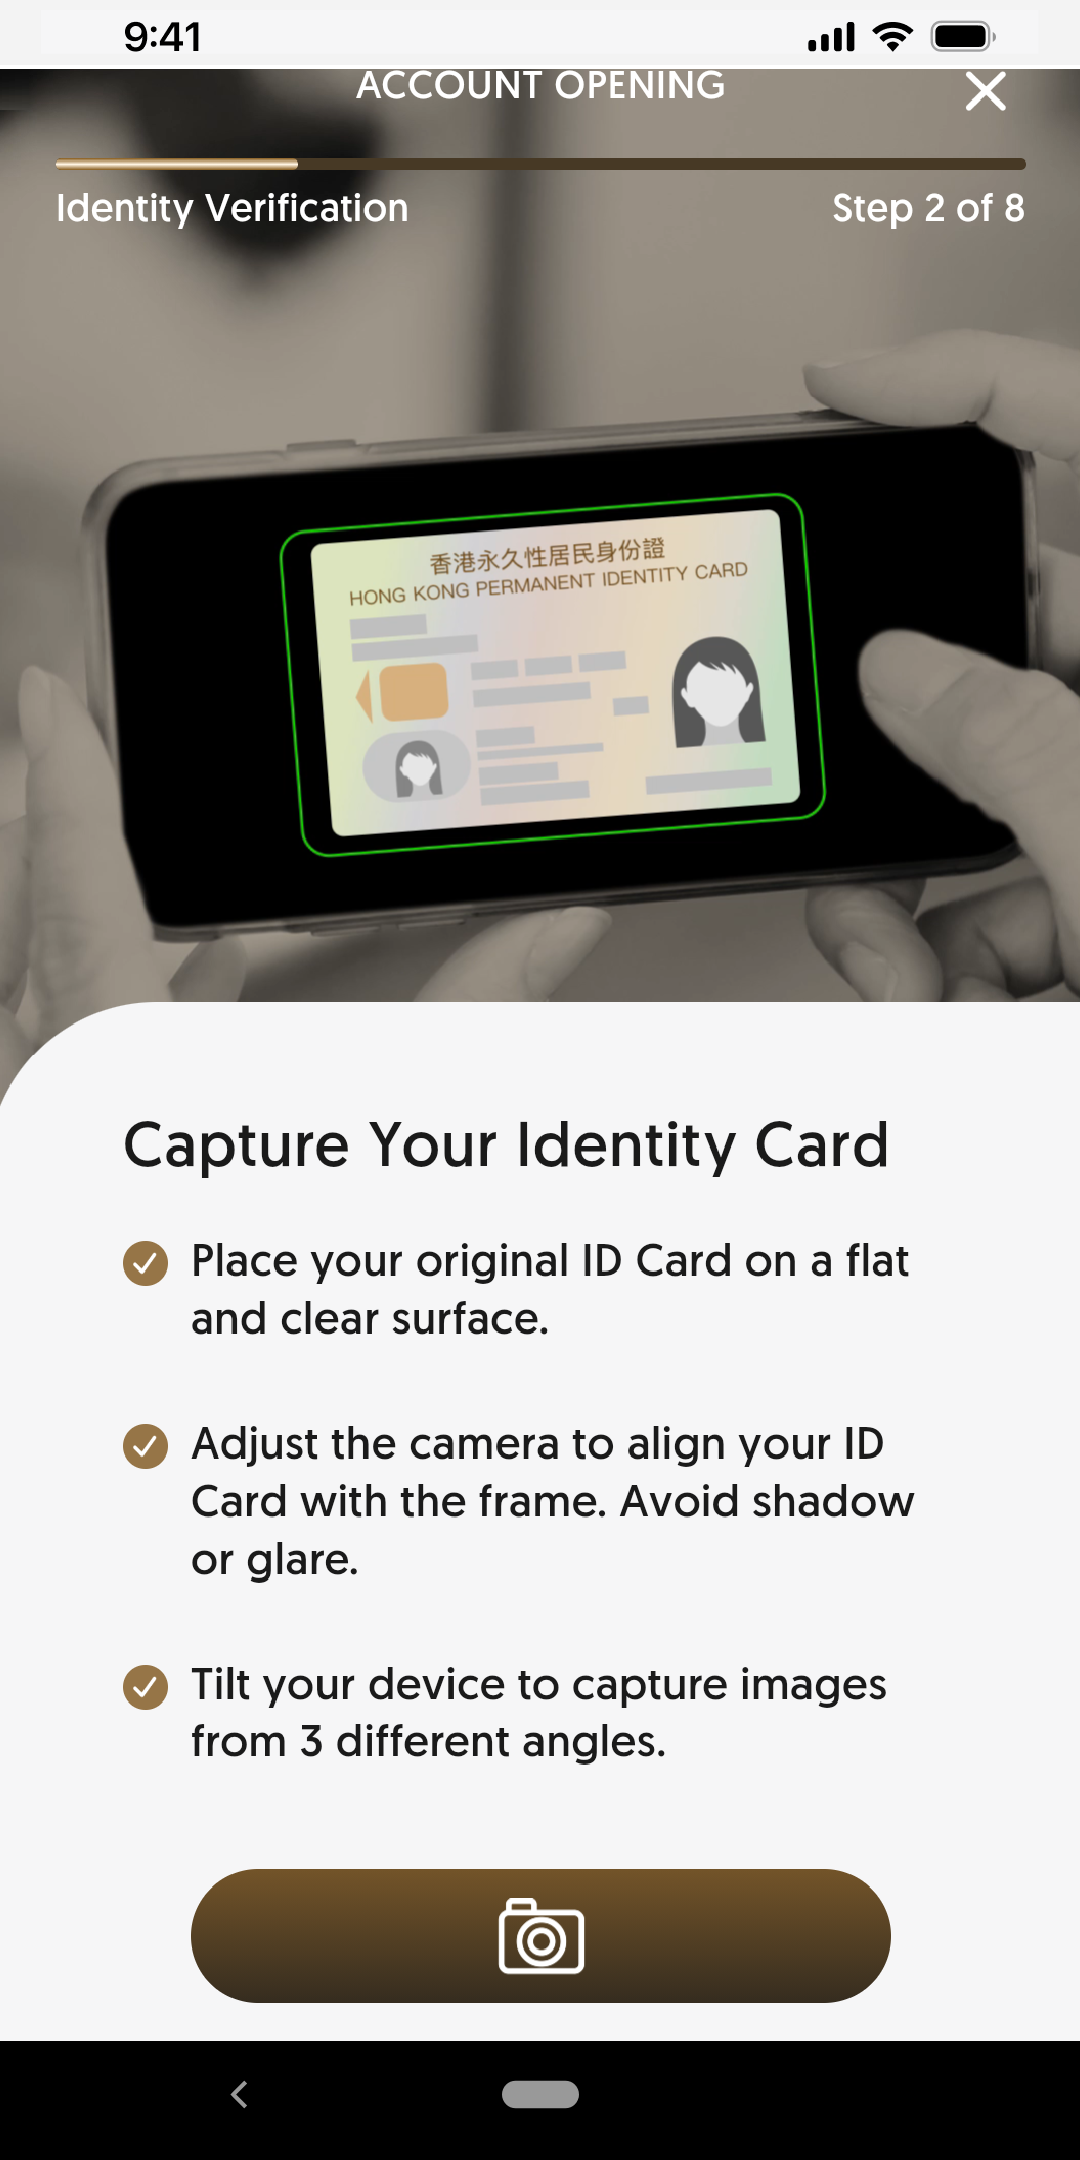 Capture your HKID Card